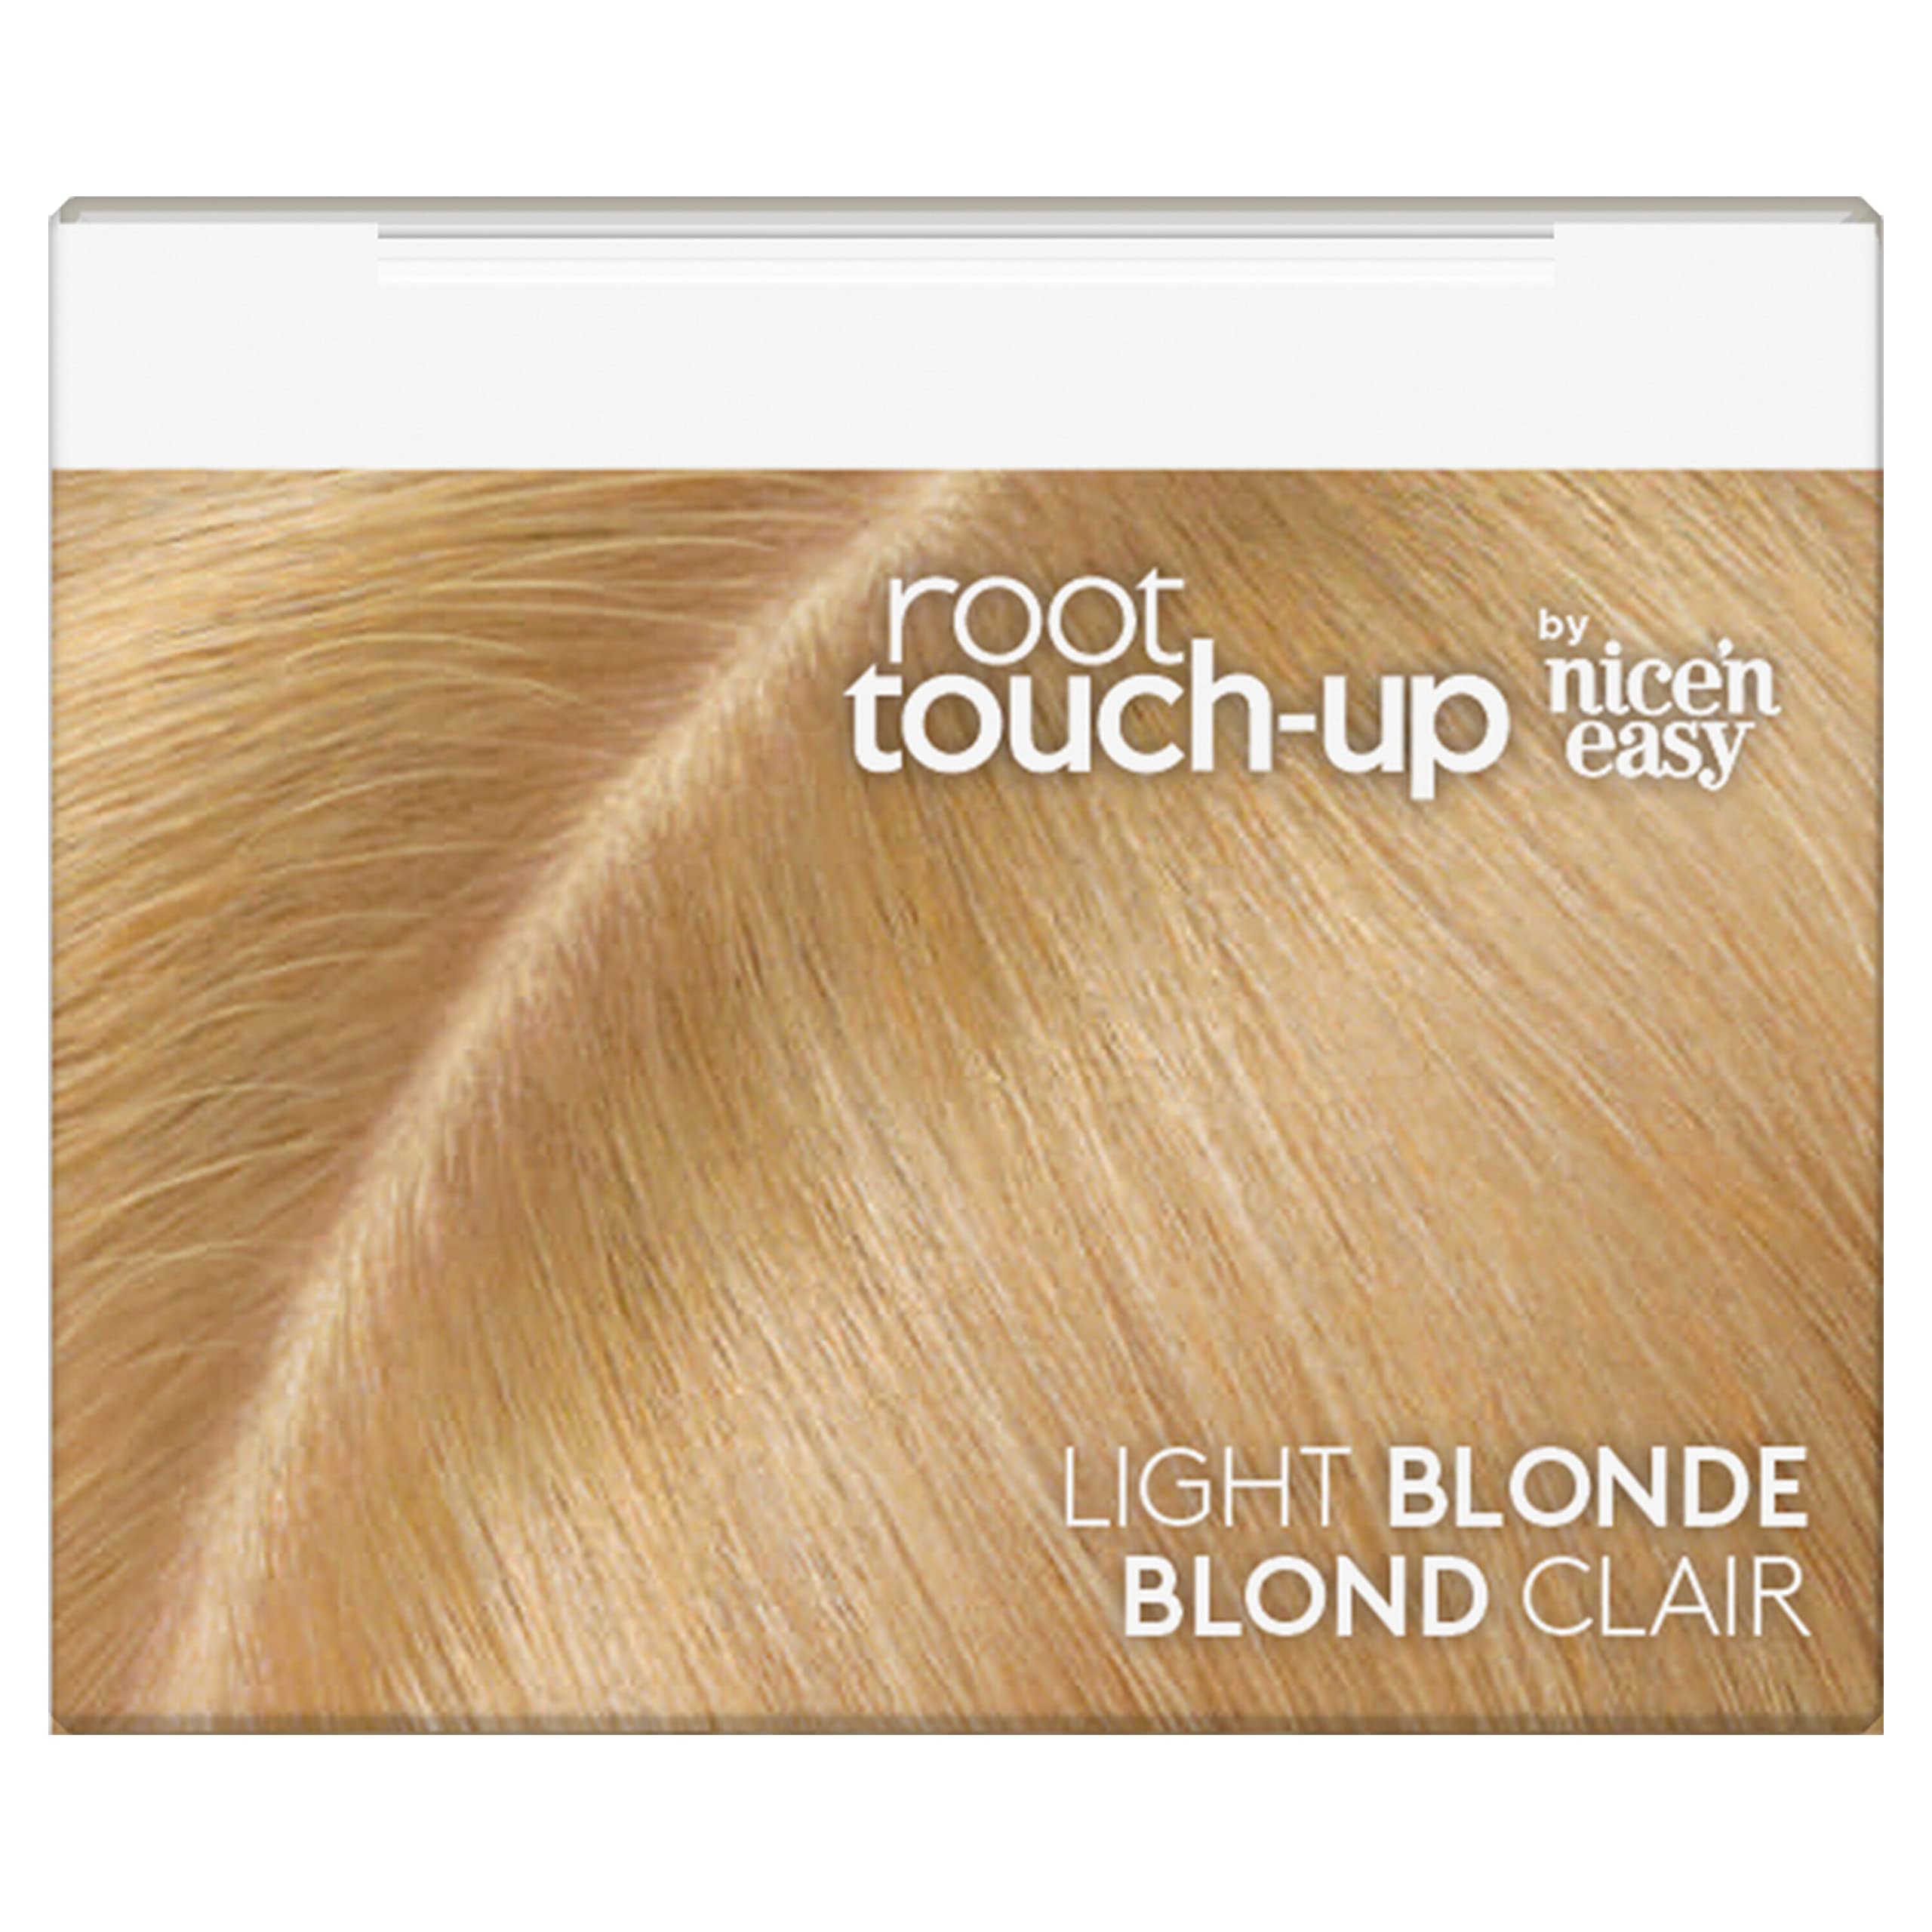 Clairol Root Touch-Up Semi-Permanent Hair Color Blending Gel, 8 Blonde, Pack of 2